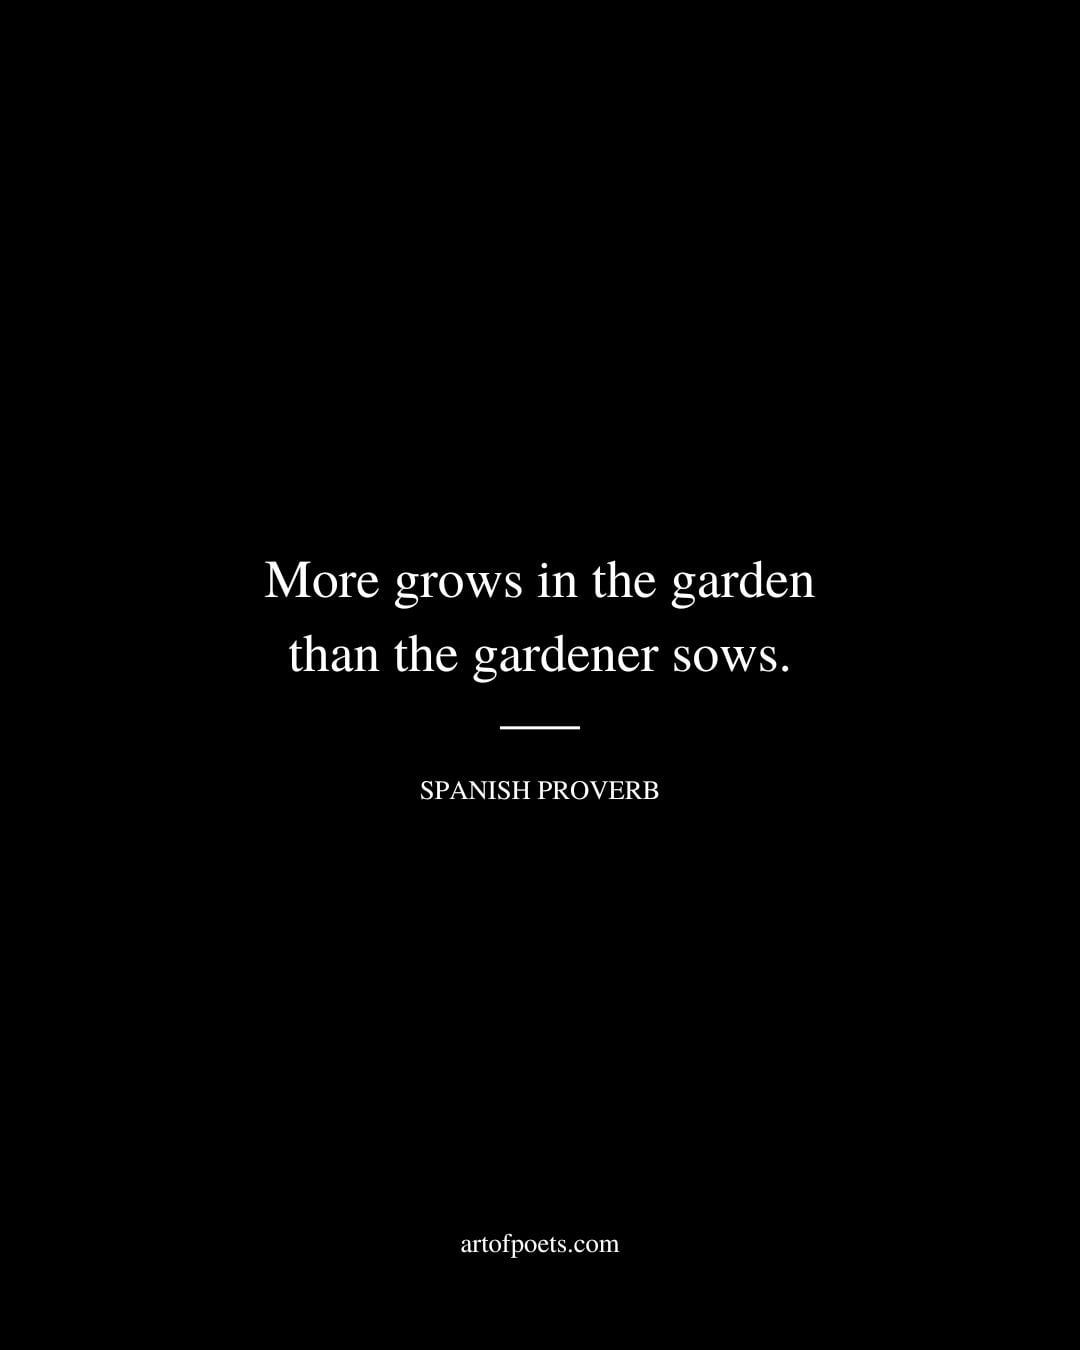 More grows in the garden than the gardener sows. Spanish Proverb 2